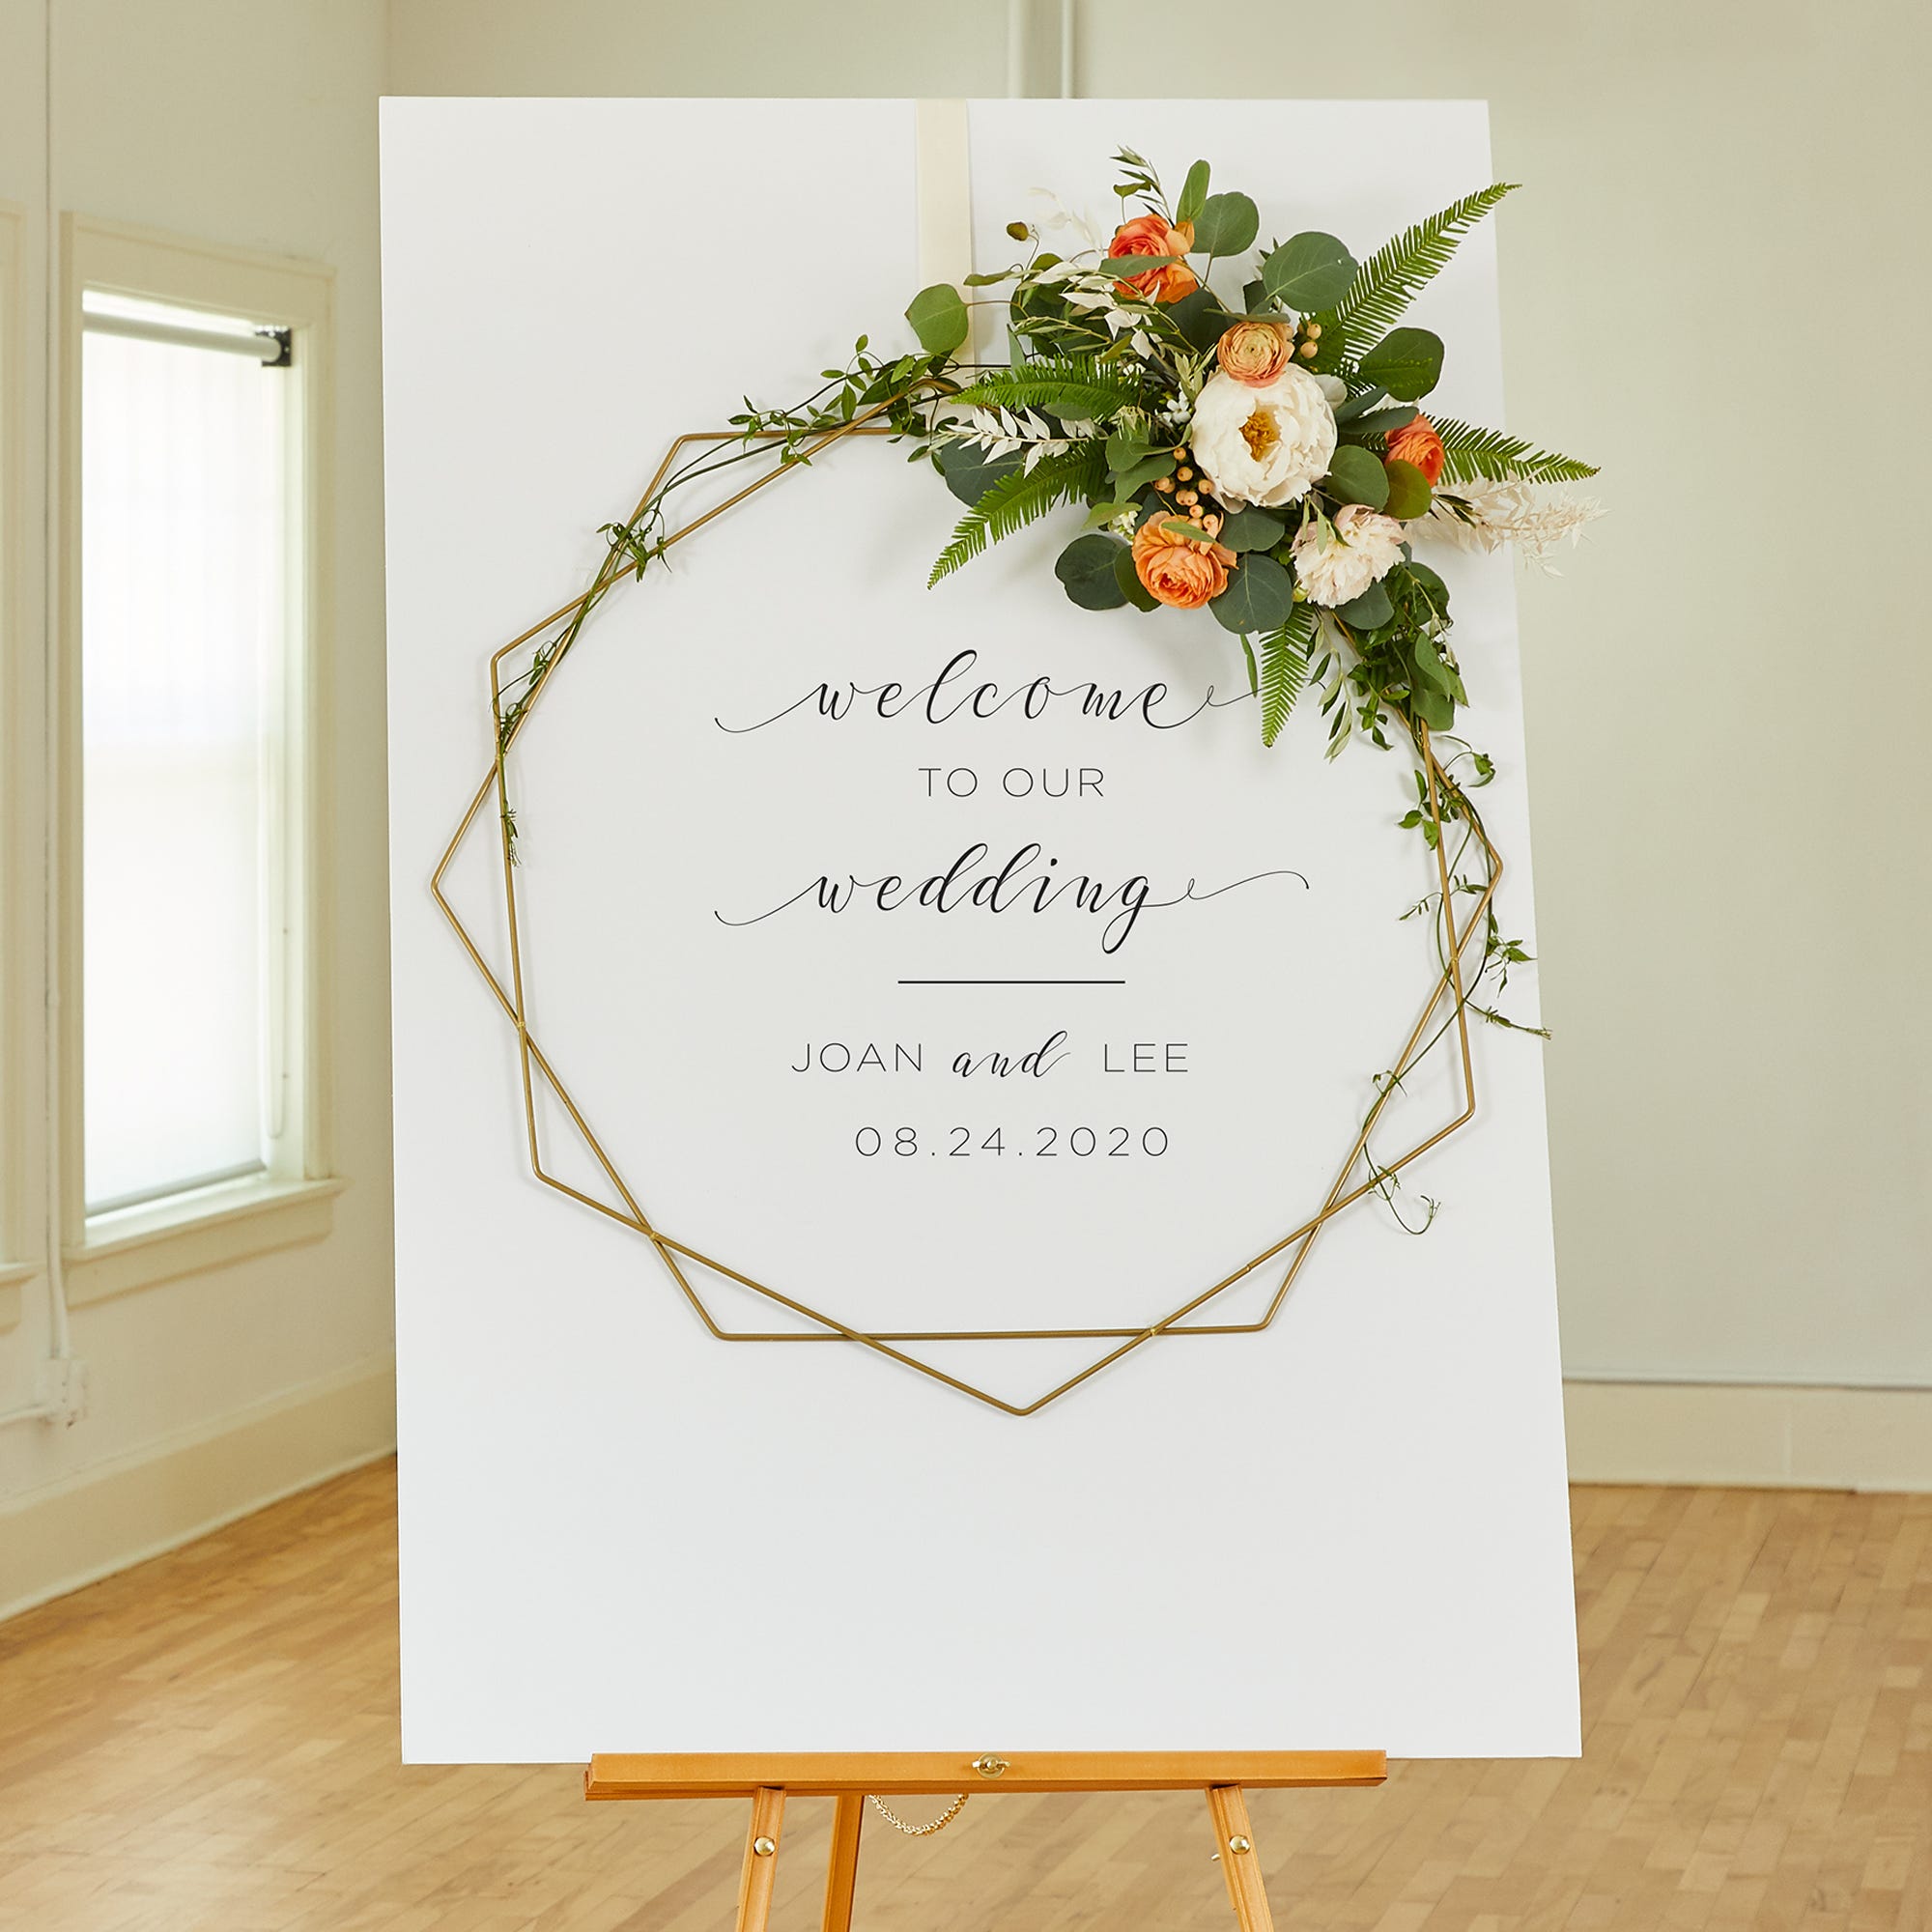 Gold wreaths with coral, cream, and green florals displayed on a Welcome to Our Wedding sign